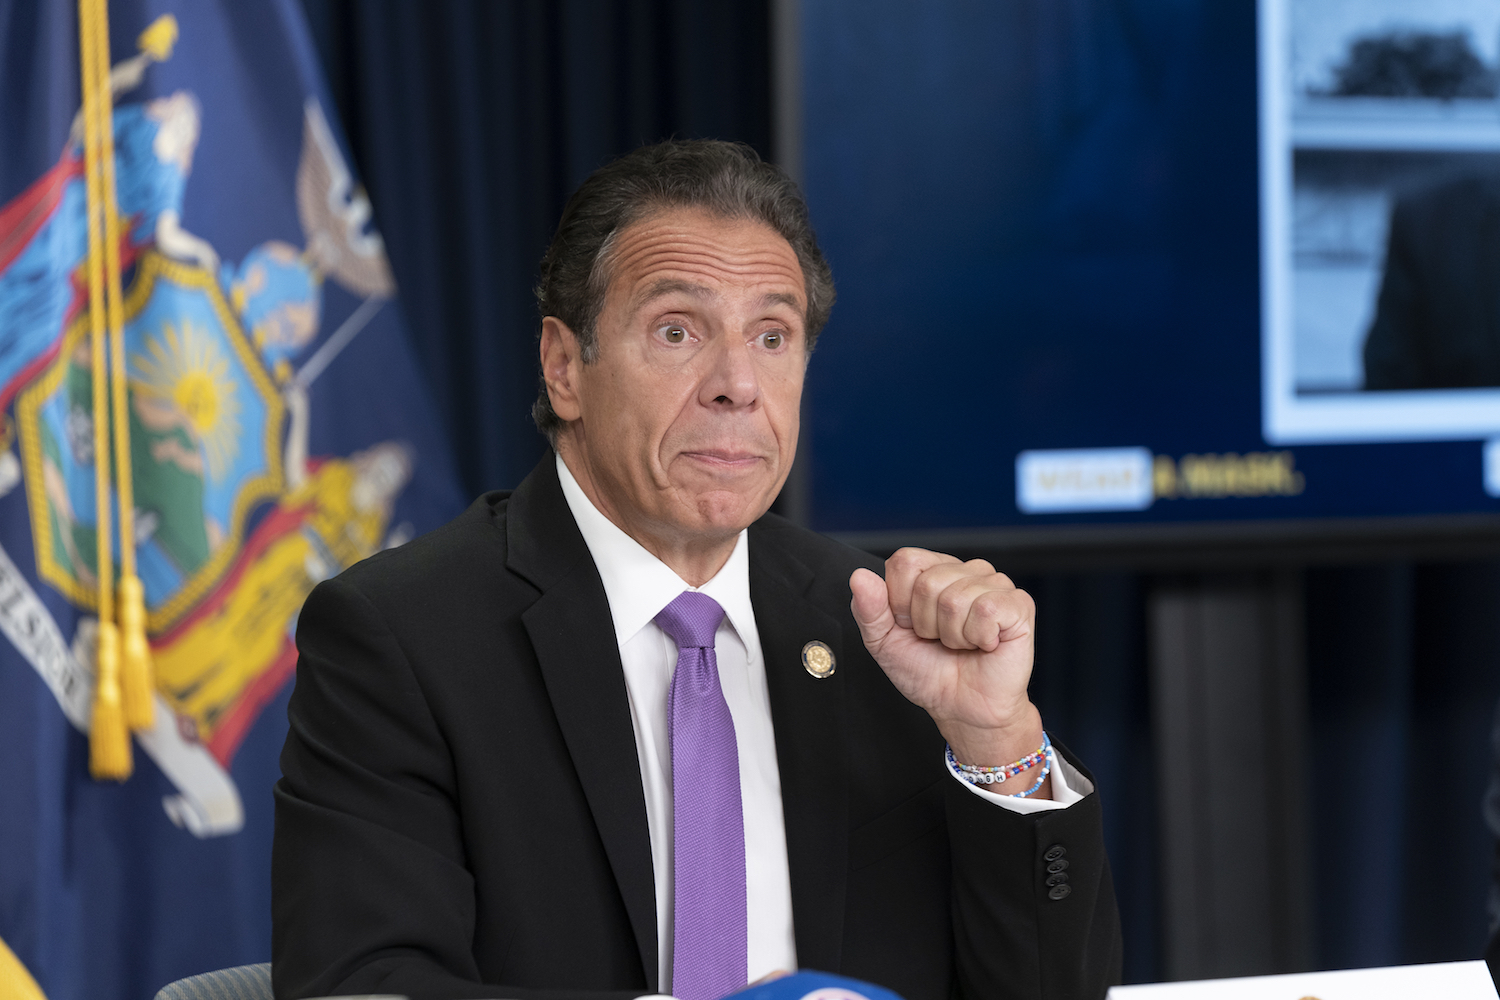 In Labor Day remarks, Cuomo supports unions bosses, not workers